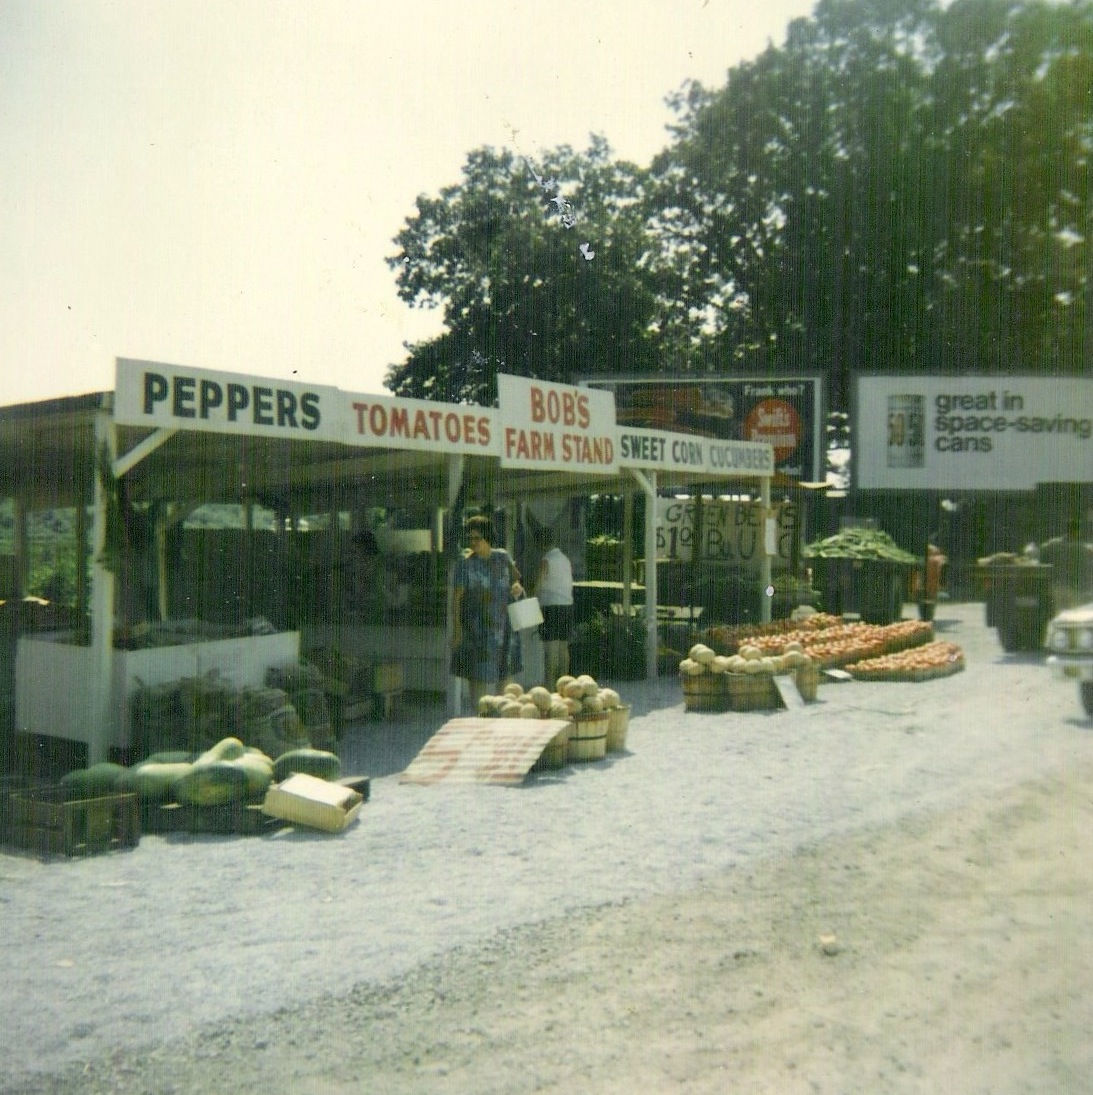 Bob's Farm Stand on Route 6, late 1960s